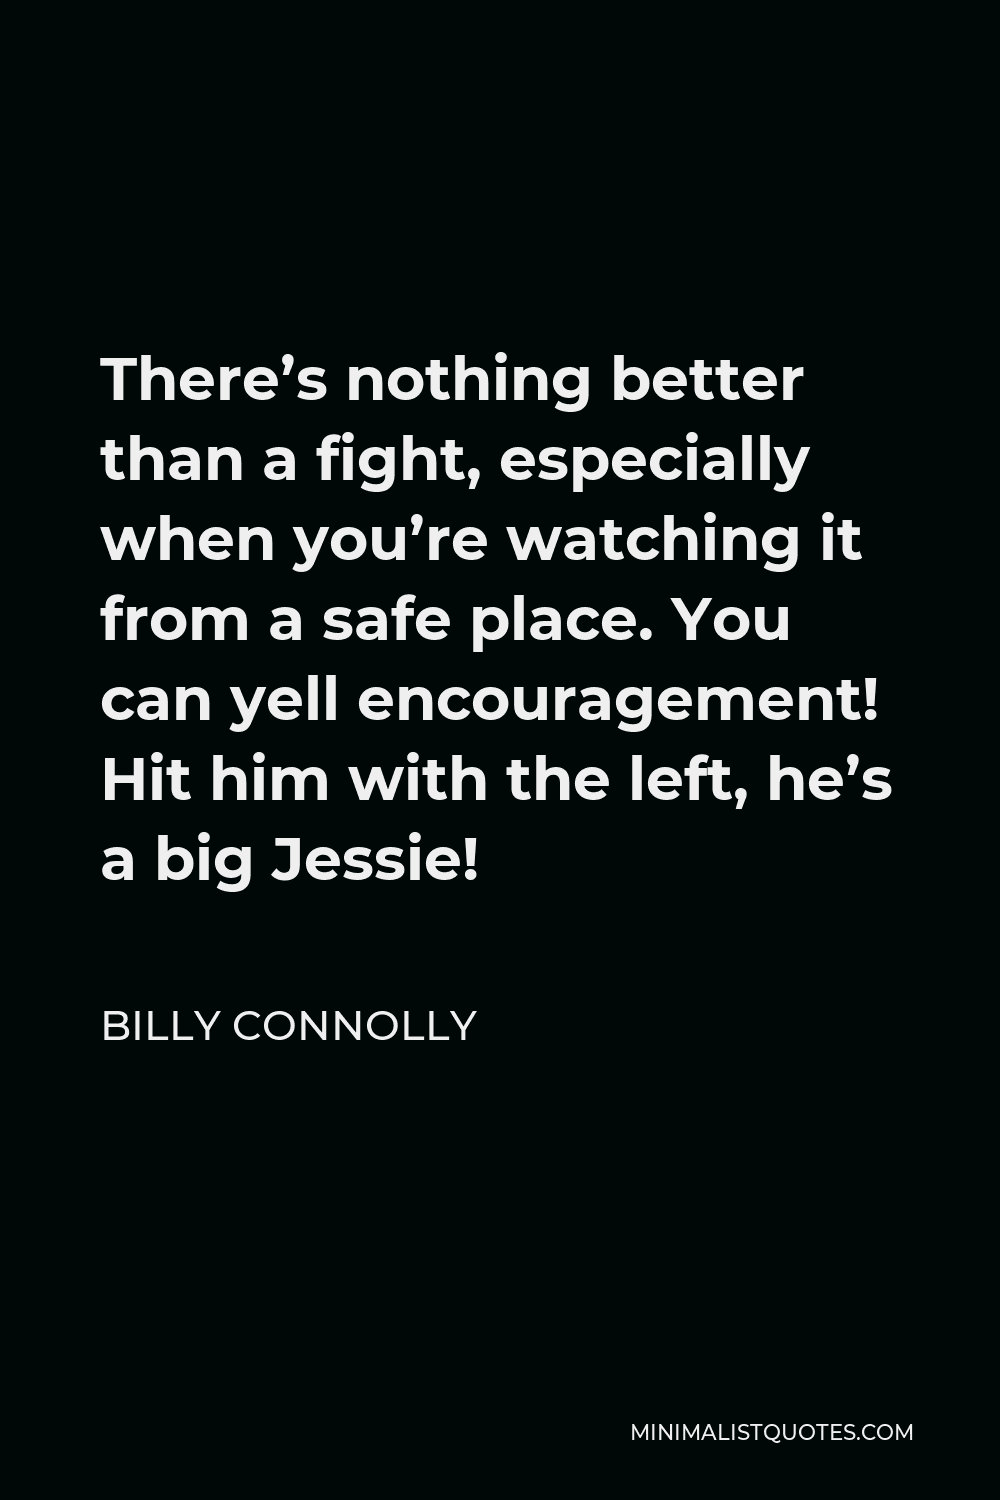 Billy Connolly Quote - There’s nothing better than a fight, especially when you’re watching it from a safe place. You can yell encouragement! Hit him with the left, he’s a big Jessie!